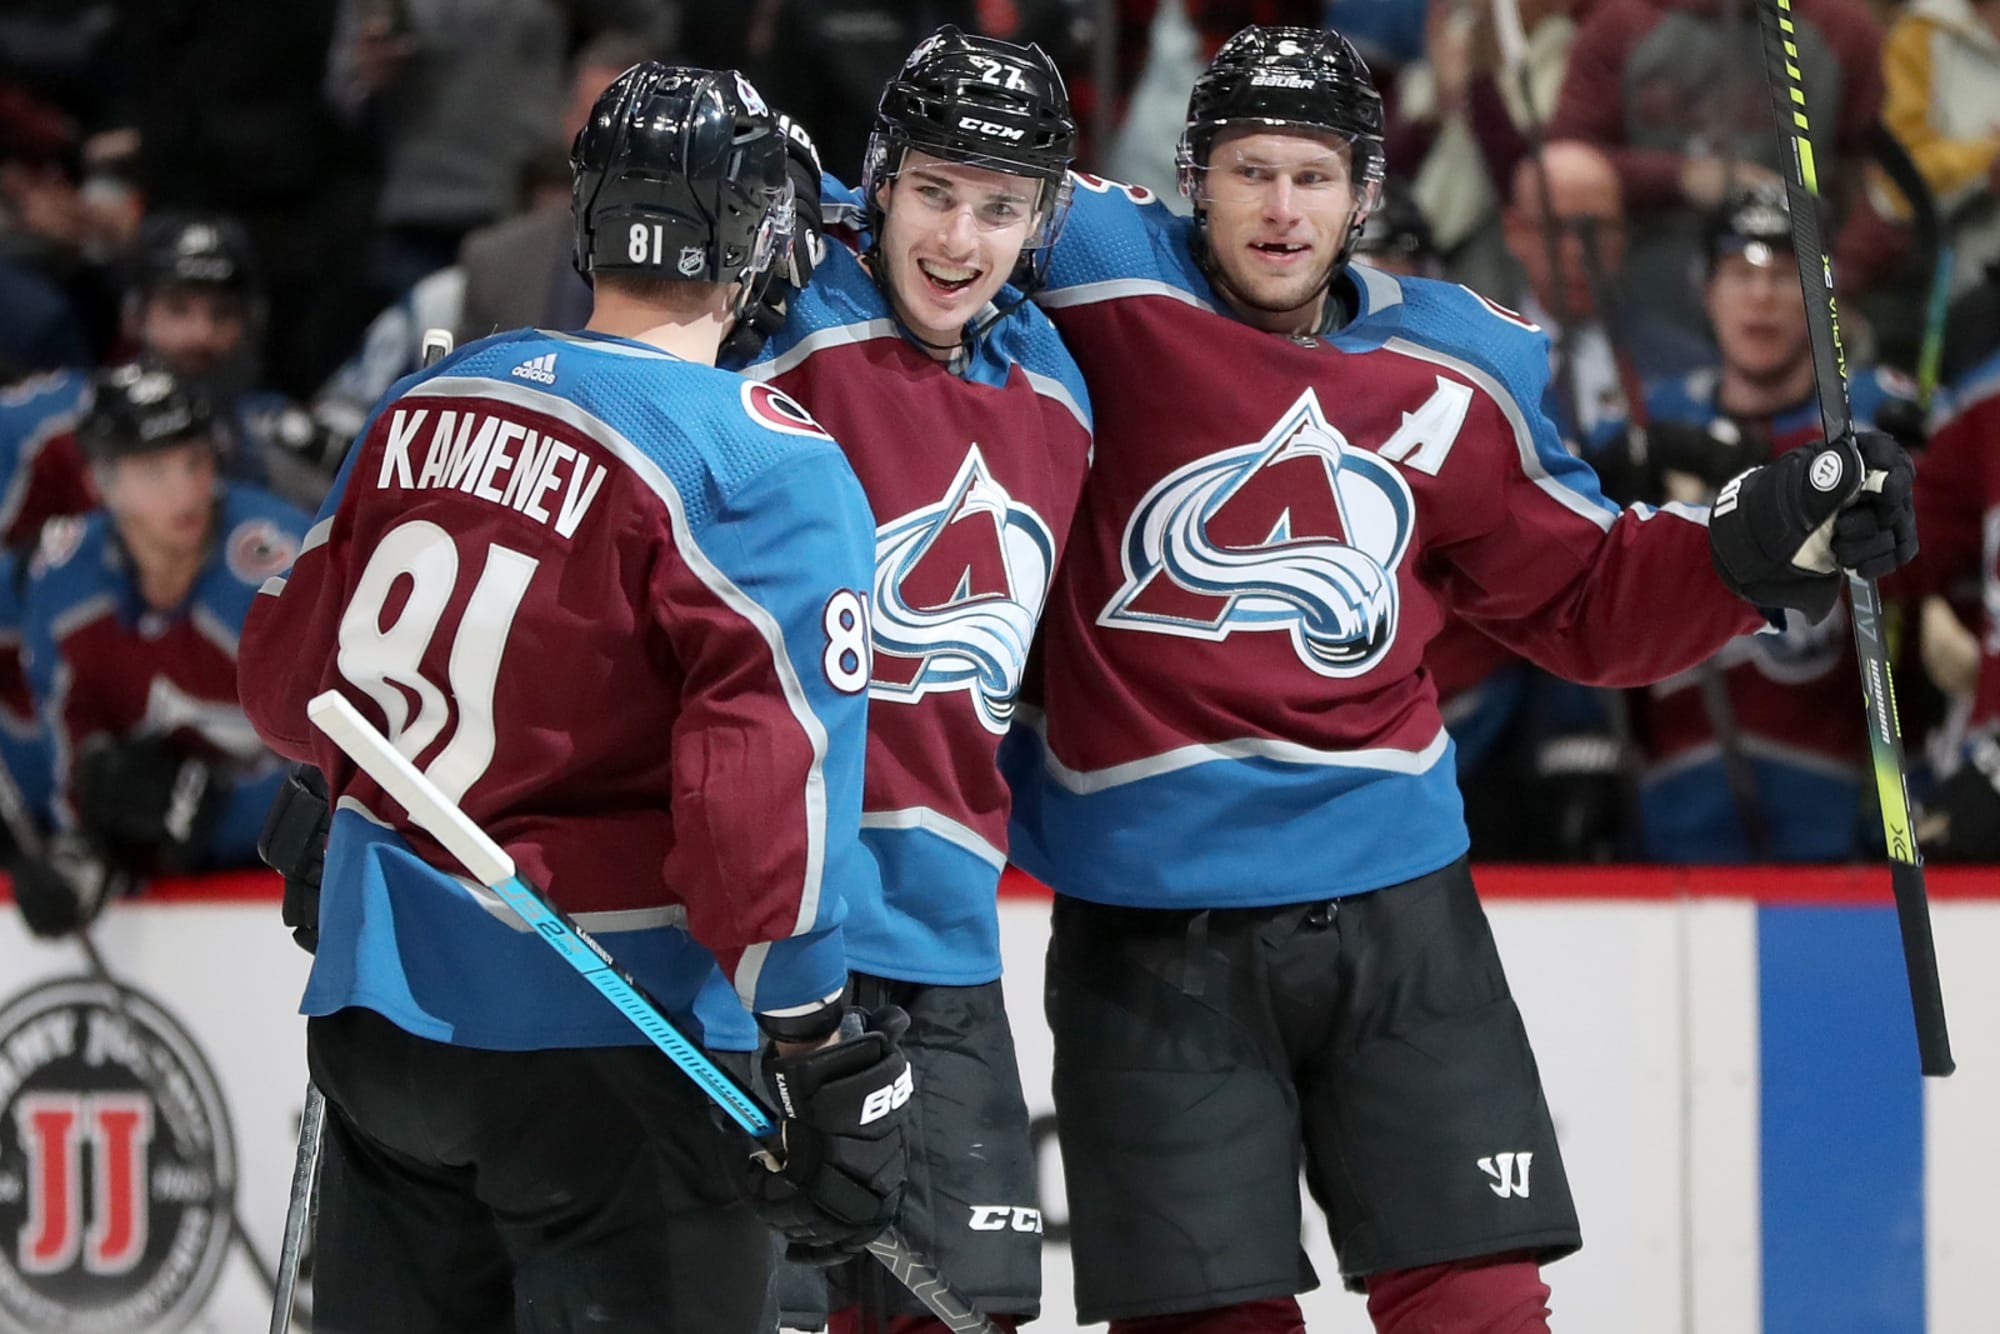 Colorado Avalanche The Best Playoff Match-ups for the Avs